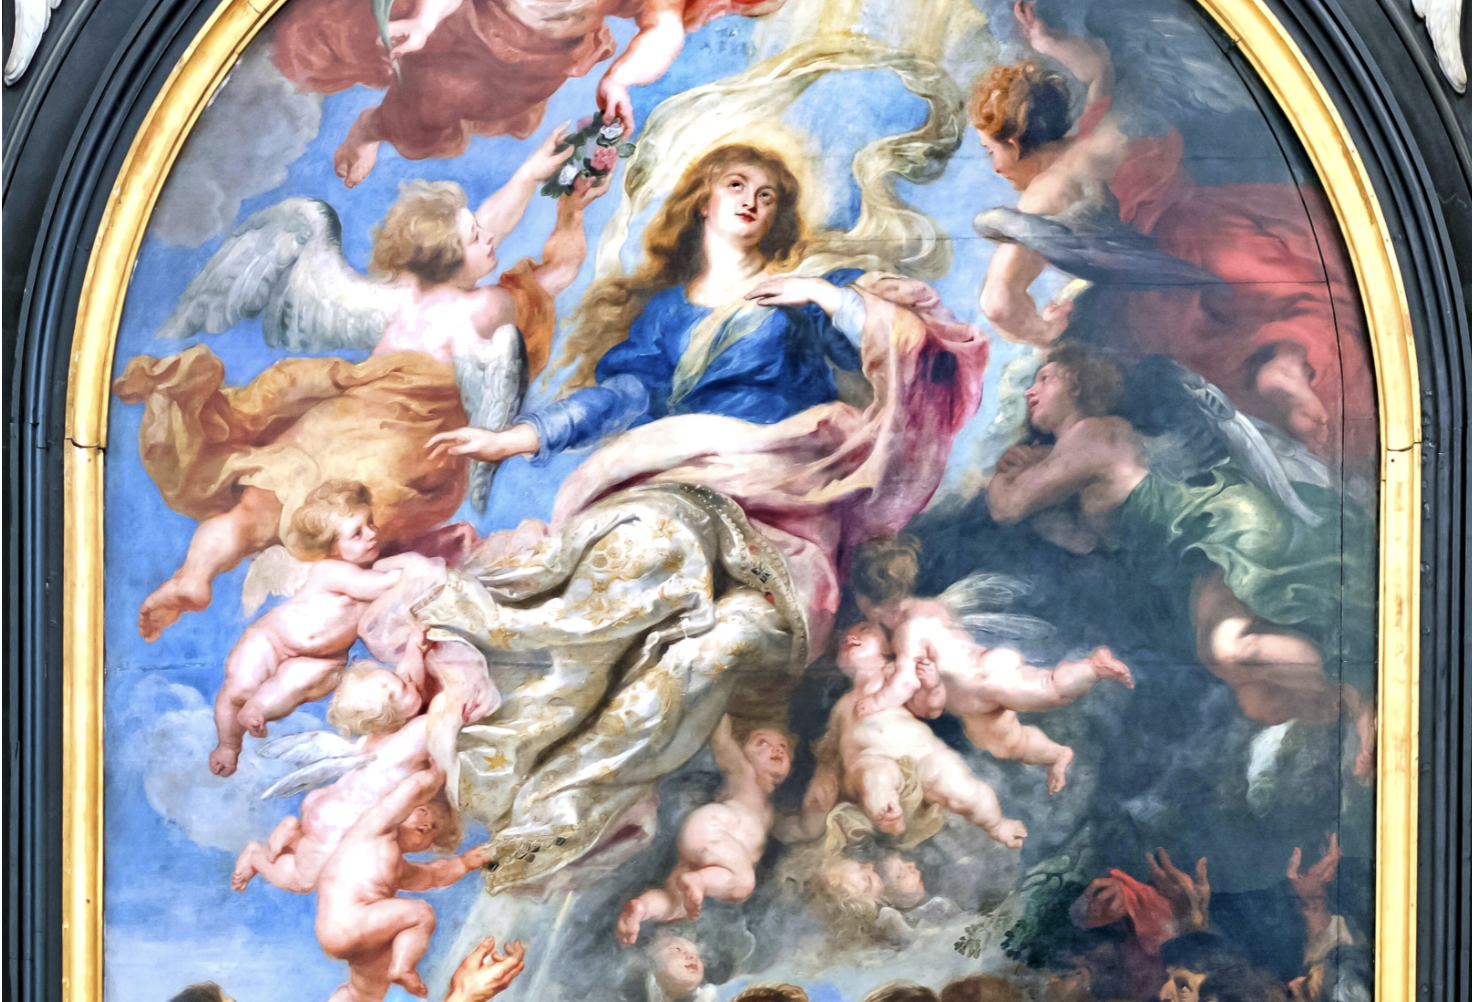 Assumption of the Virgin Mary (1637) by Peter Paul Rubens - Public Domain Catholic Painting